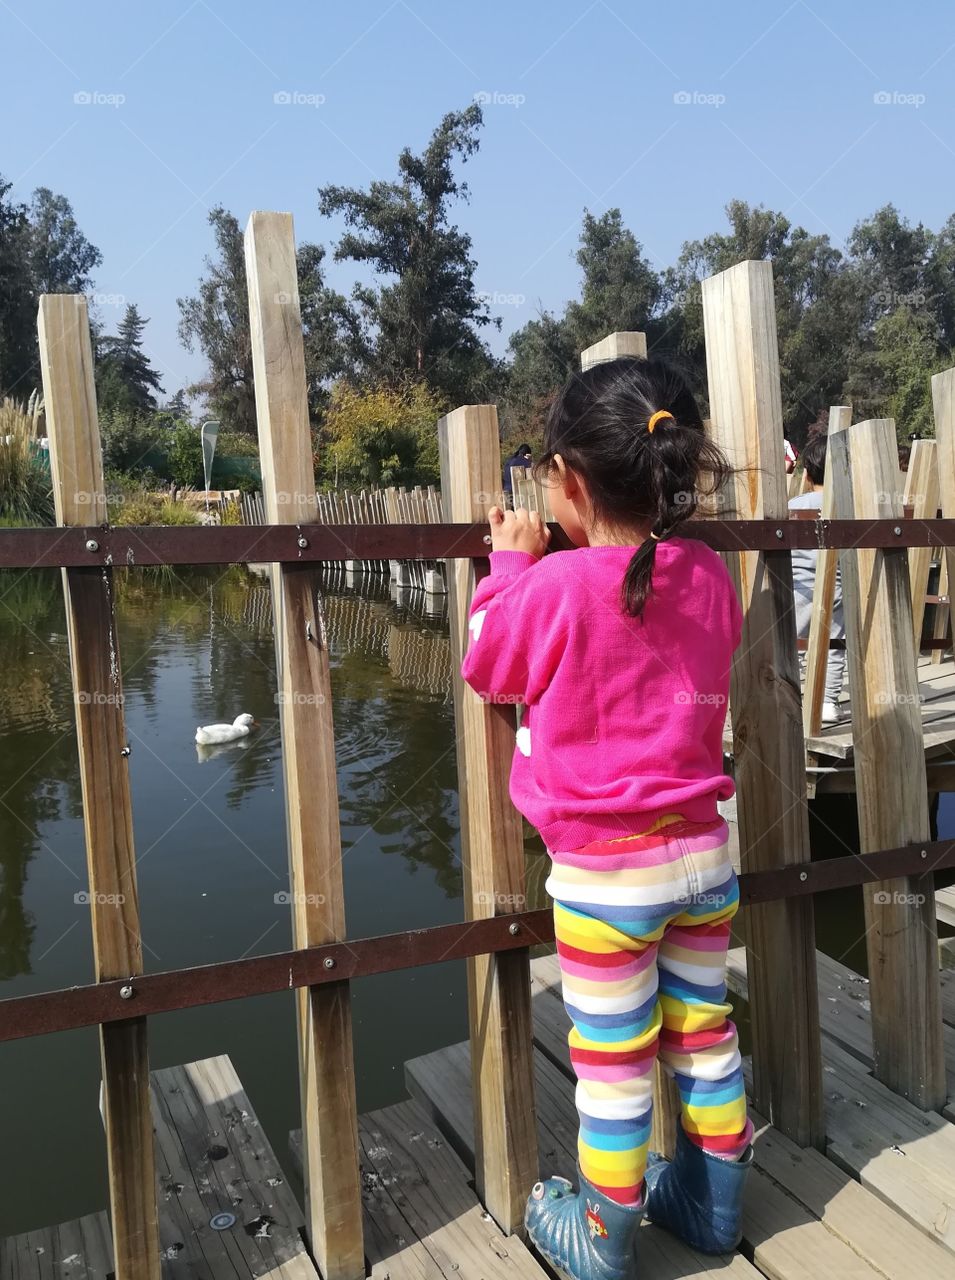 Salome goes to the park on a fall Sunday and admires the ducklings in the lagoon. Santiago de Chile